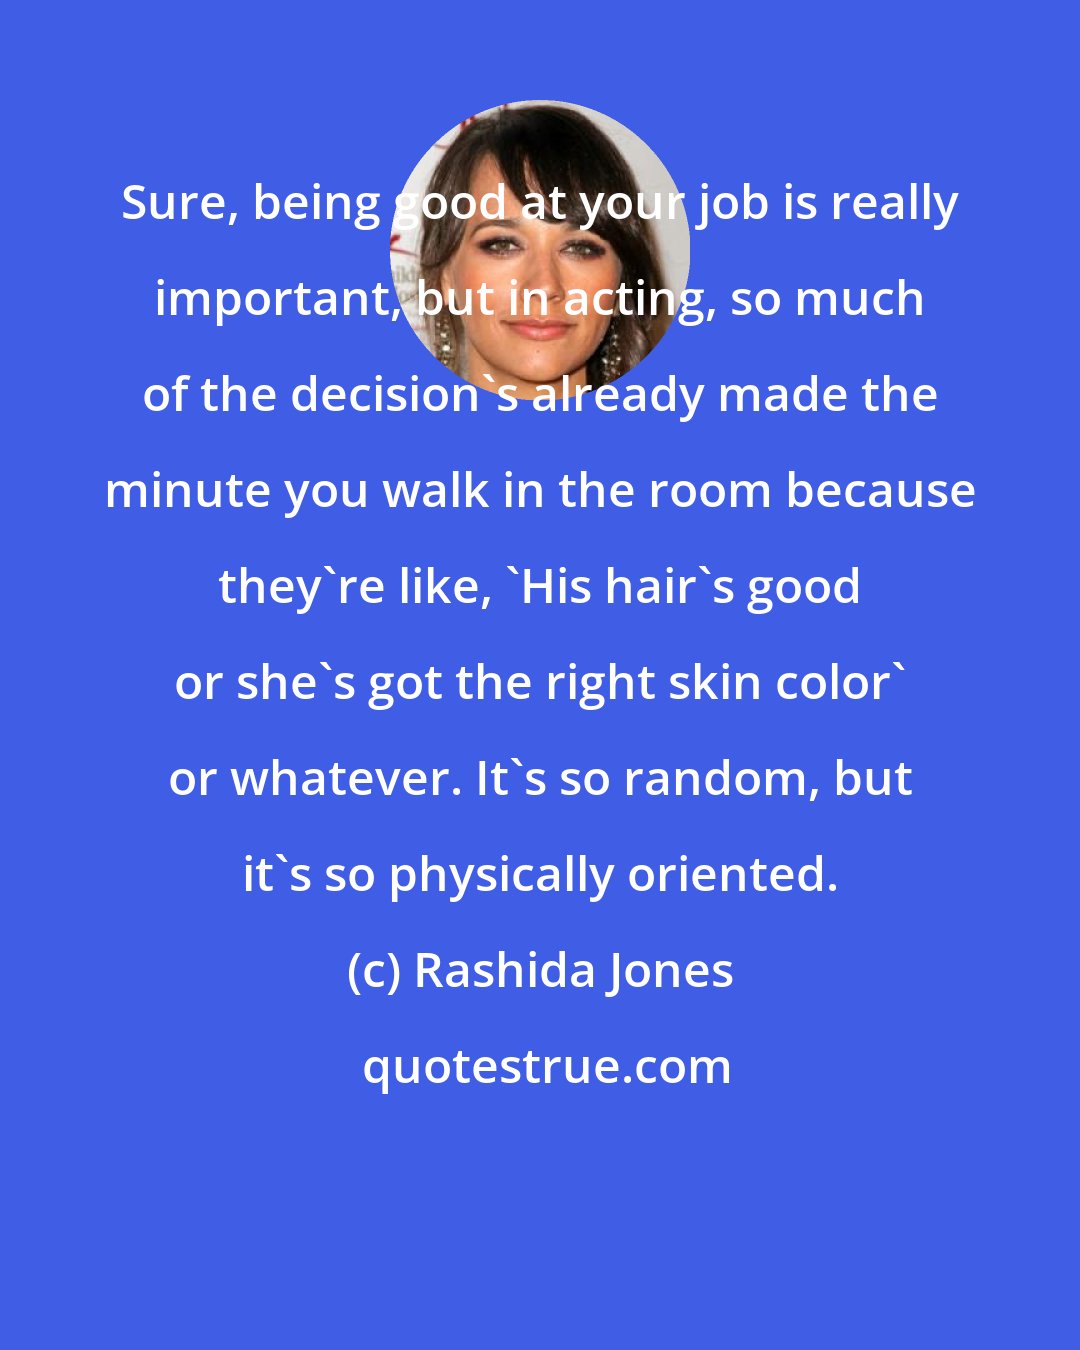 Rashida Jones: Sure, being good at your job is really important, but in acting, so much of the decision's already made the minute you walk in the room because they're like, 'His hair's good or she's got the right skin color' or whatever. It's so random, but it's so physically oriented.